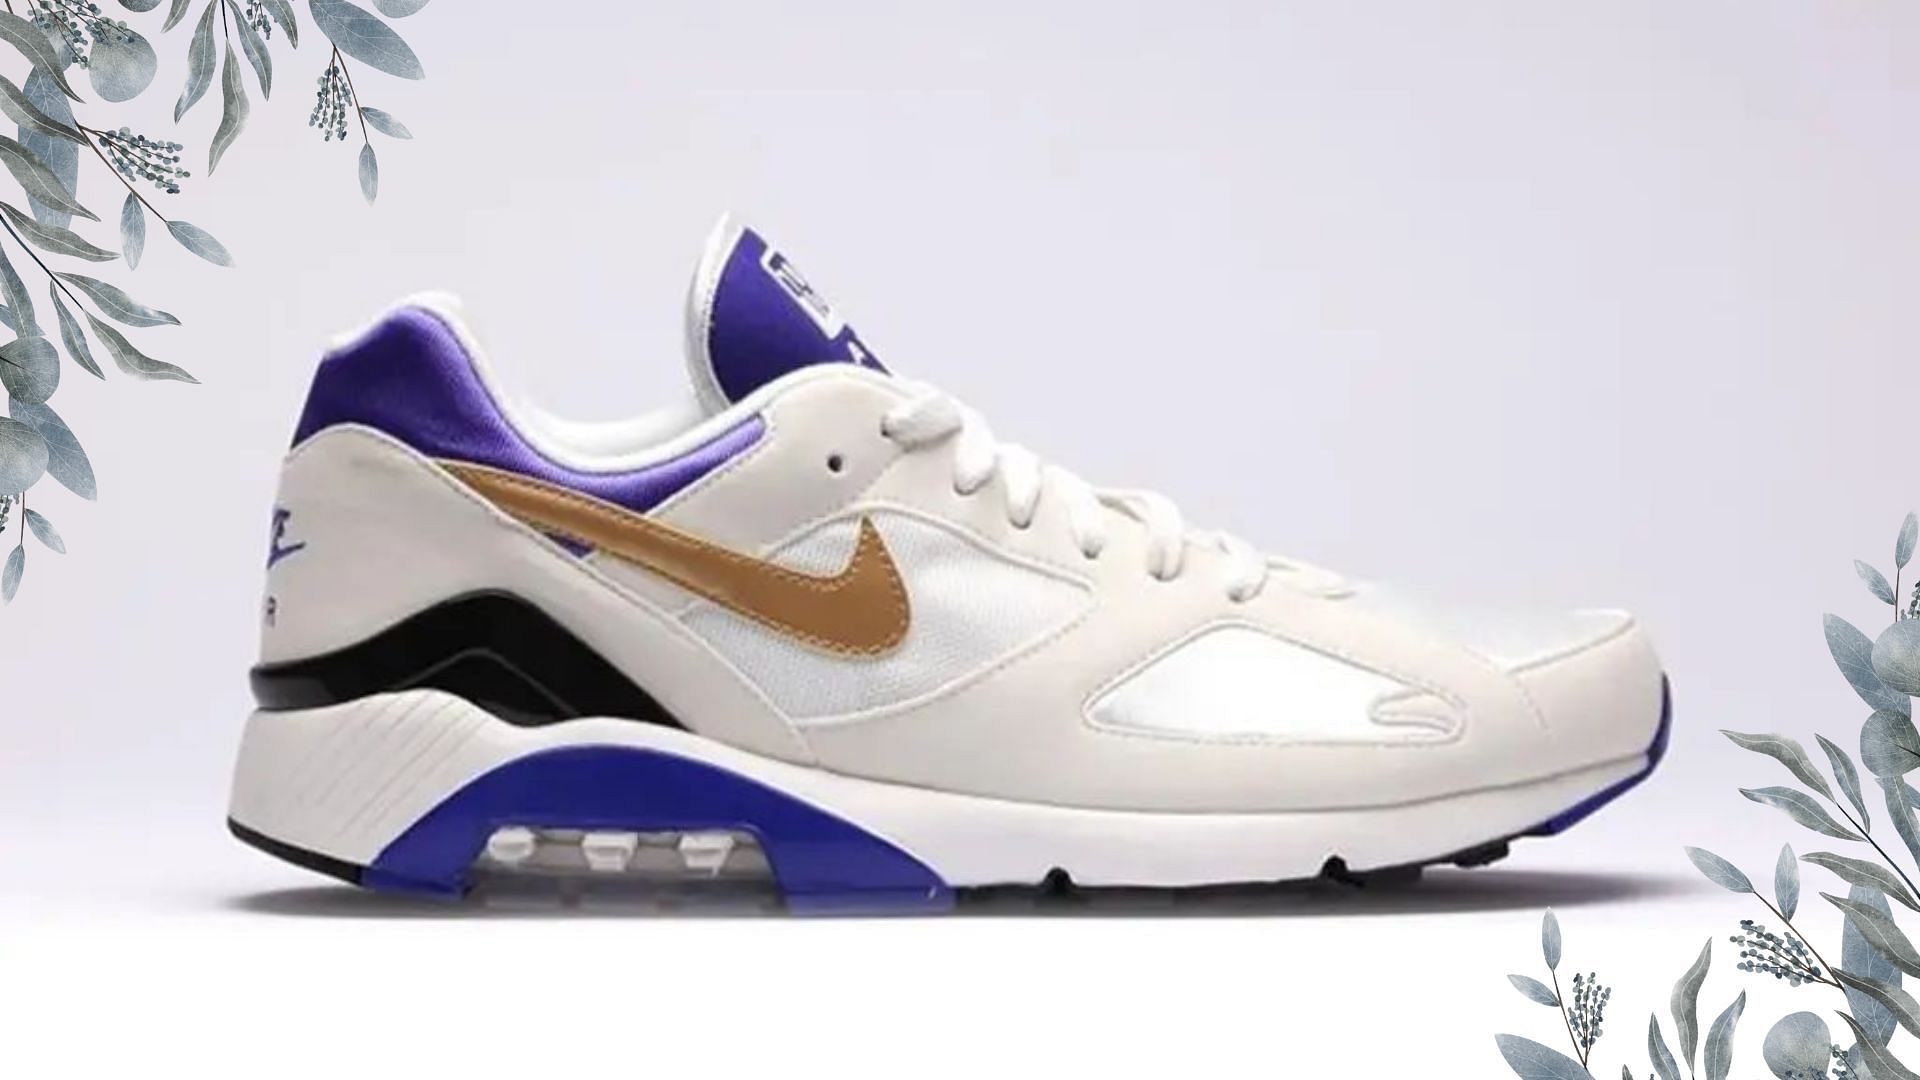 Nike Air Max 180 Concord shoes (Image via House of Heat)